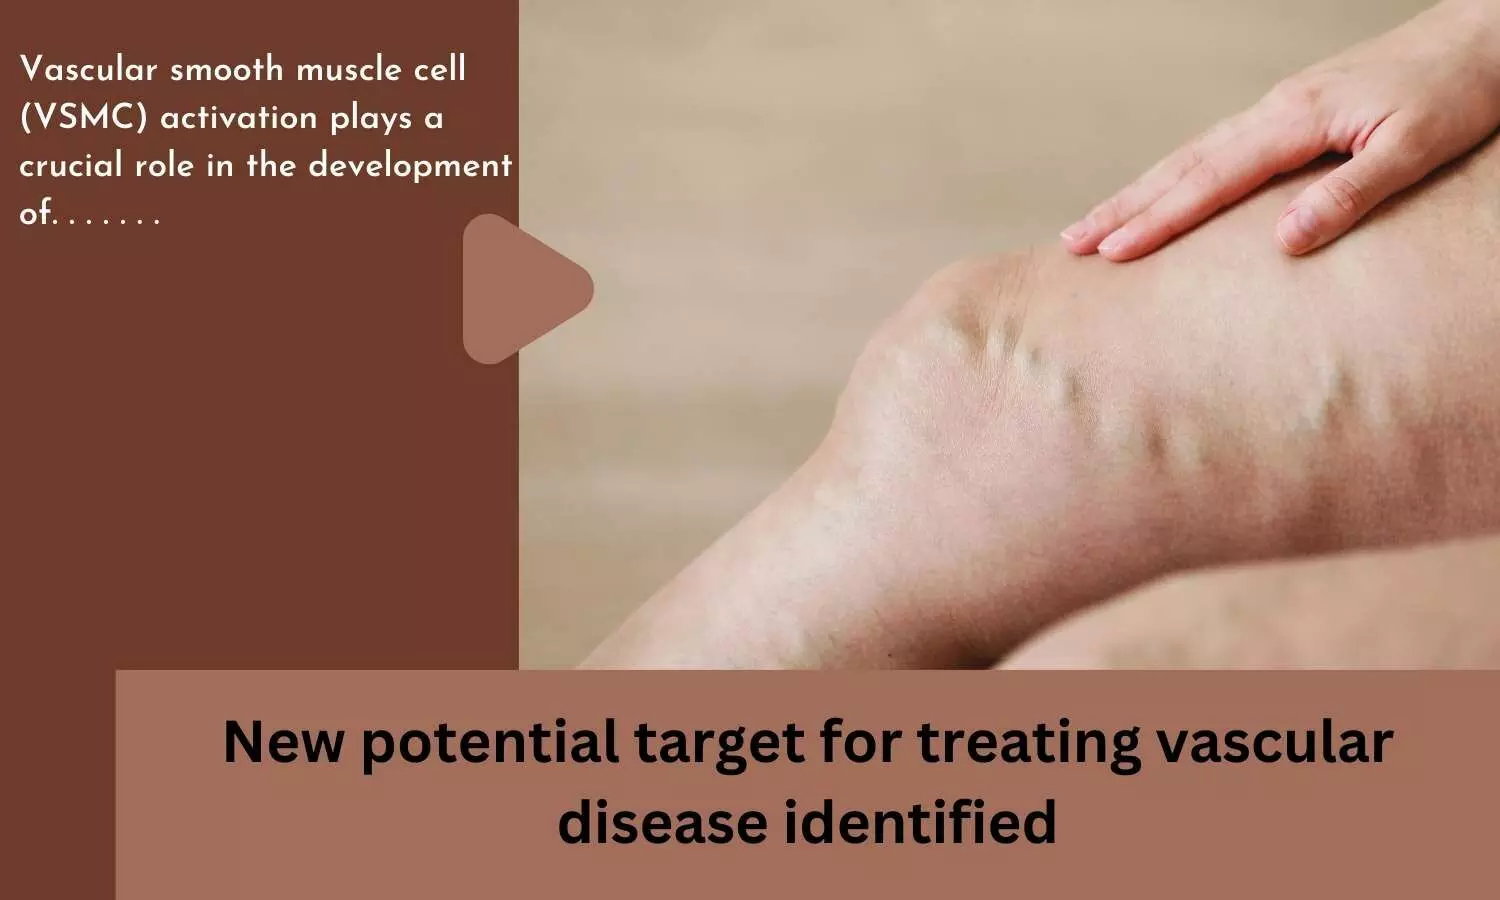 New potential target for treating vascular disease identified